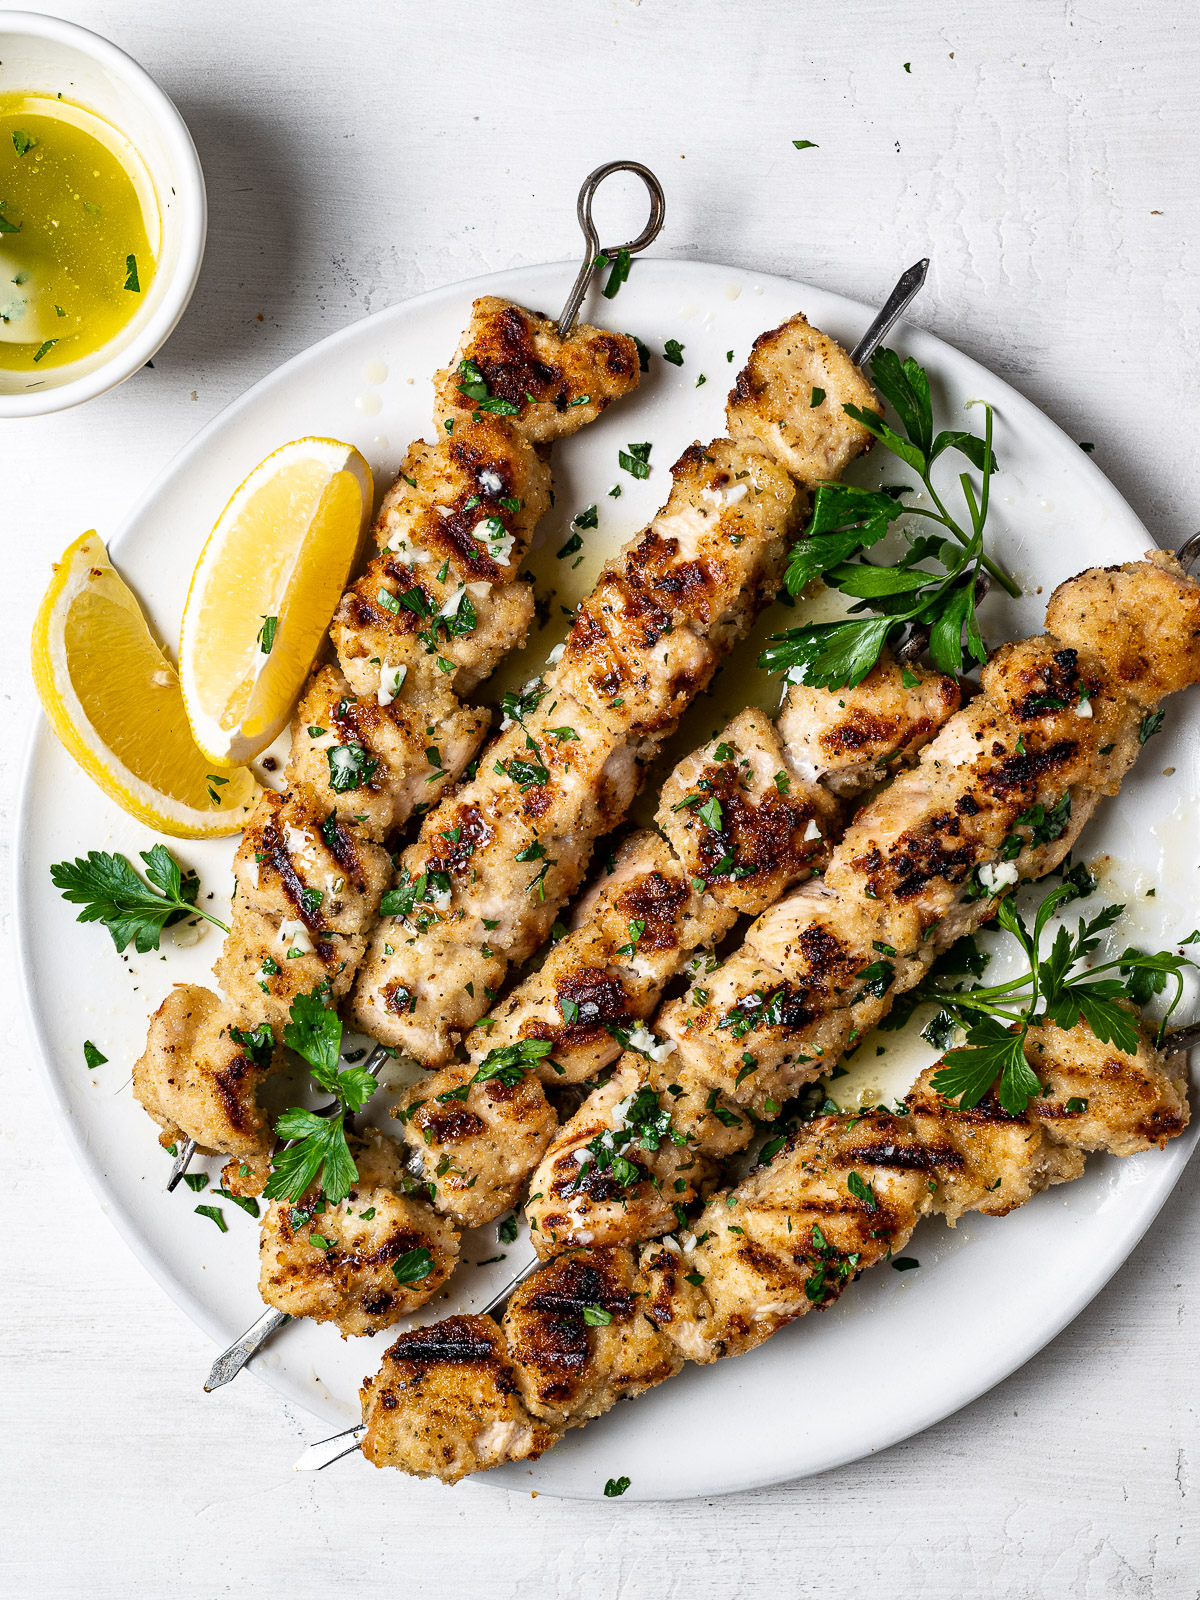 grilled chicken spiedini skewers served on platter with lemon wedges and lemon butter sauce on the side